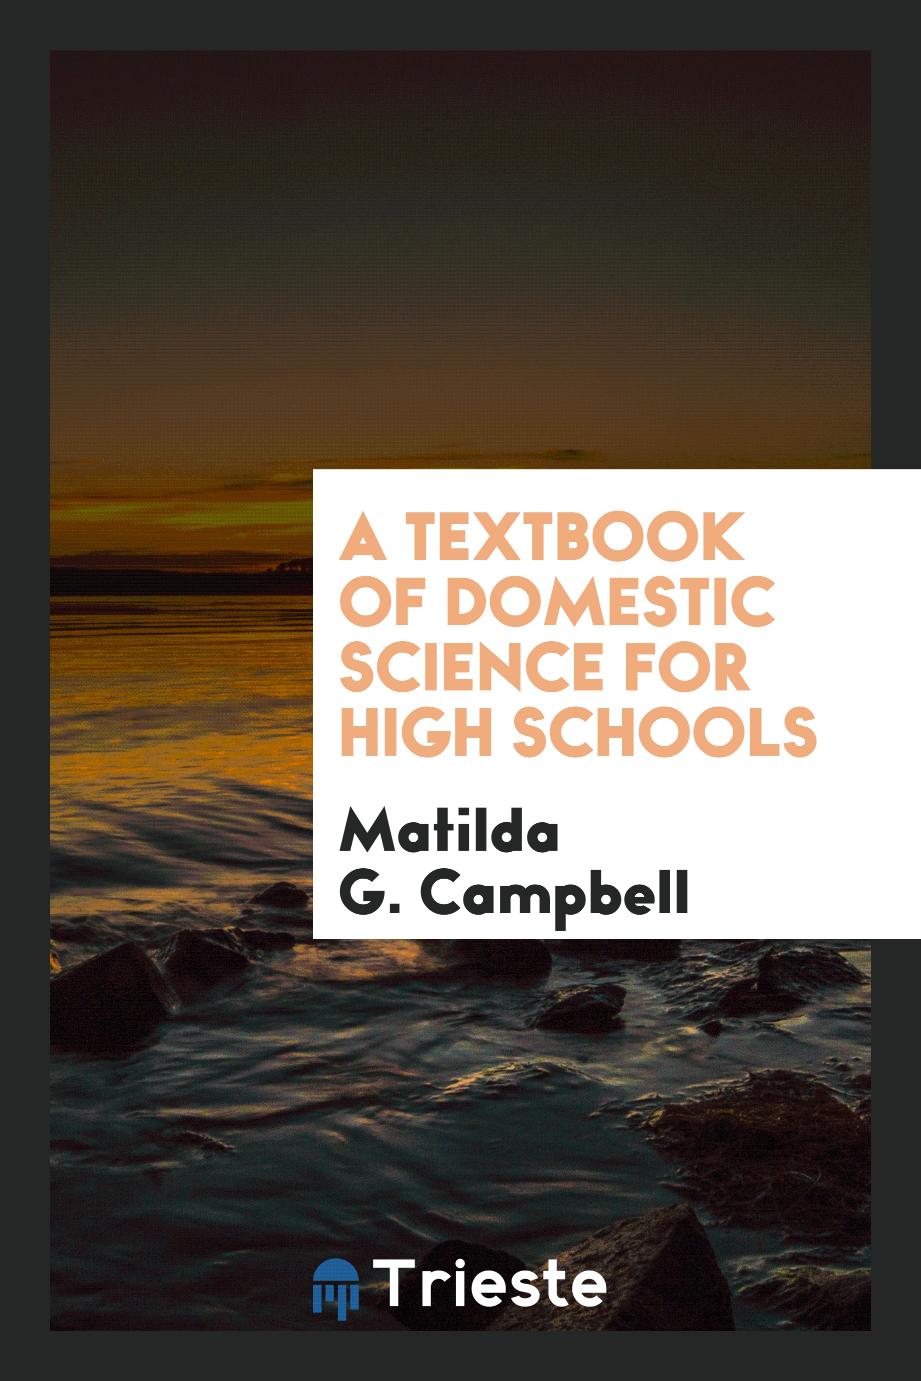 A textbook of domestic science for high schools